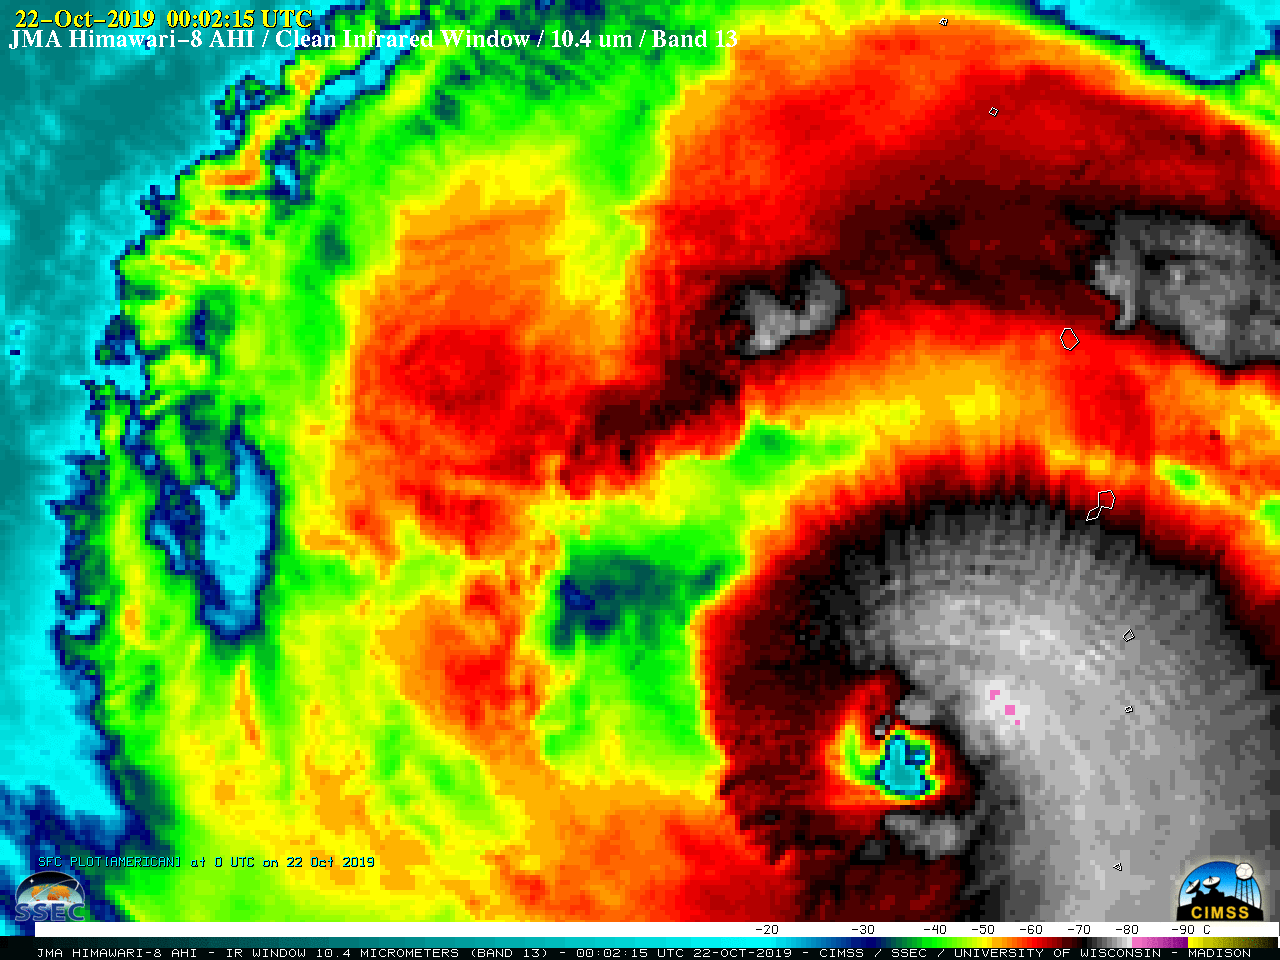 Satellite view of of Category 4 Typhoon Bualoi in the West Pacific on 22 October 2019. A 2.5-minute rapid scan Himawari8 Infrared images captures the rapid clearing of the eye. Video: SSEC / CIMSS